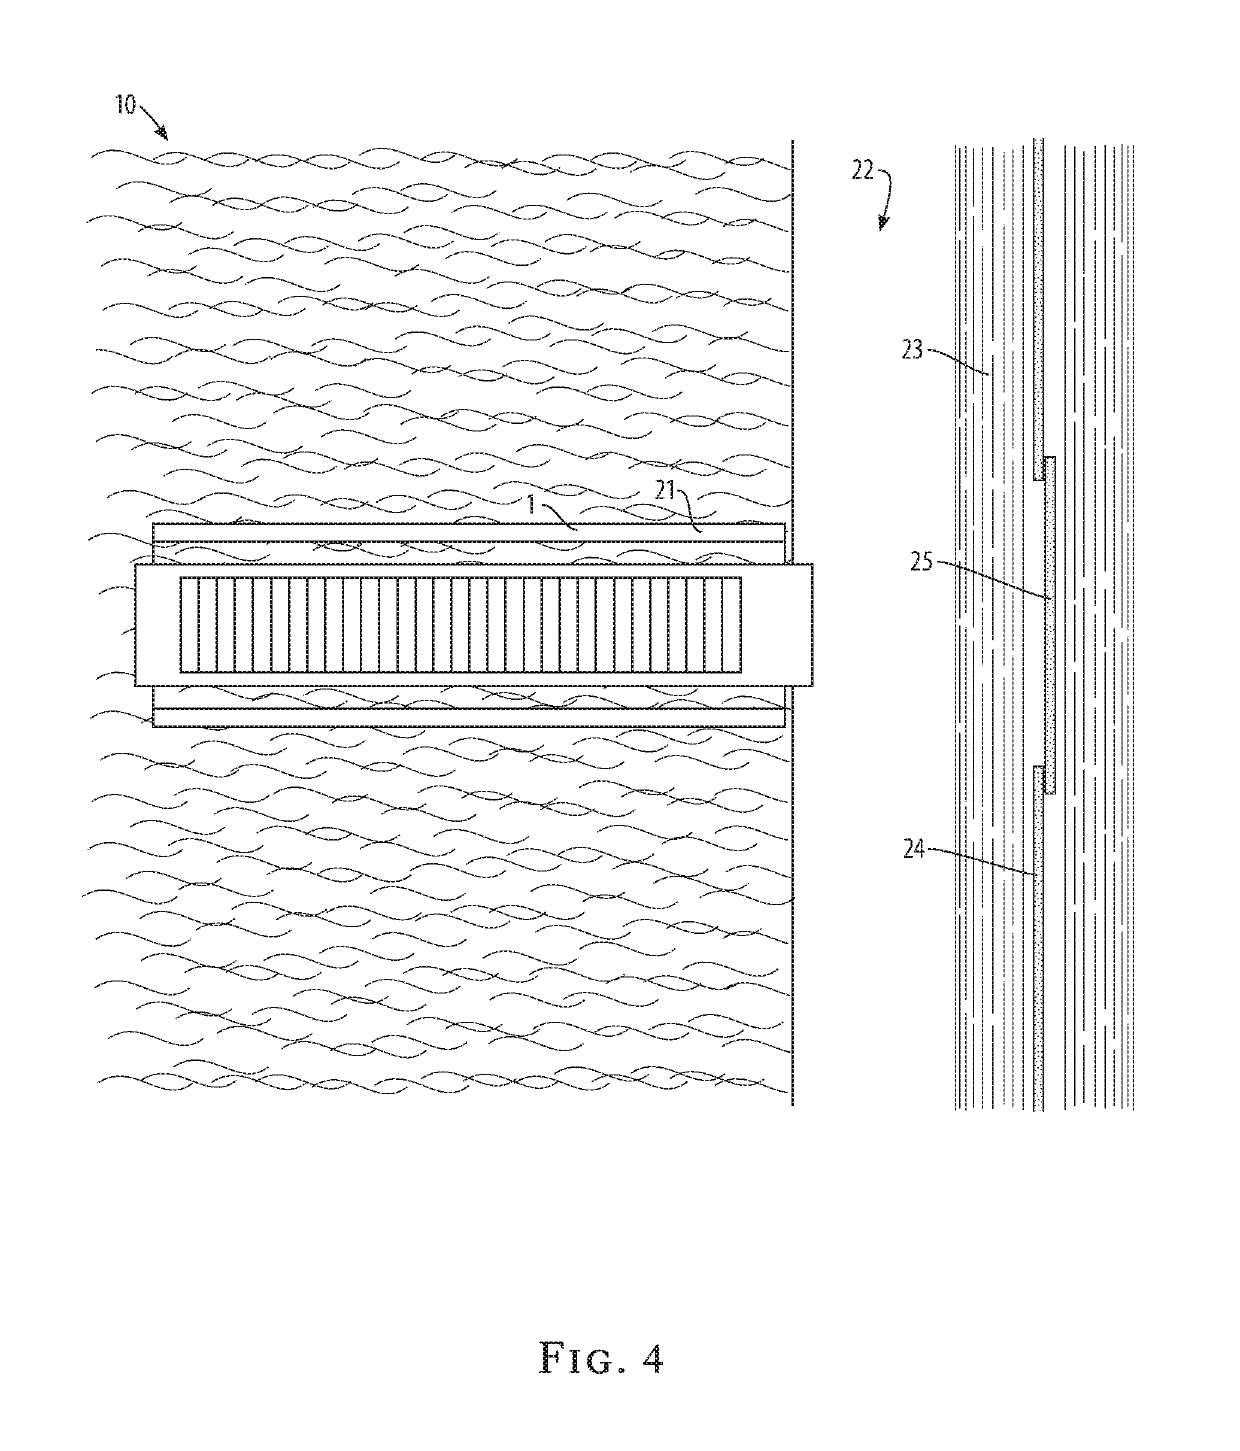 System for conveying a barge over a levee in a level attitude